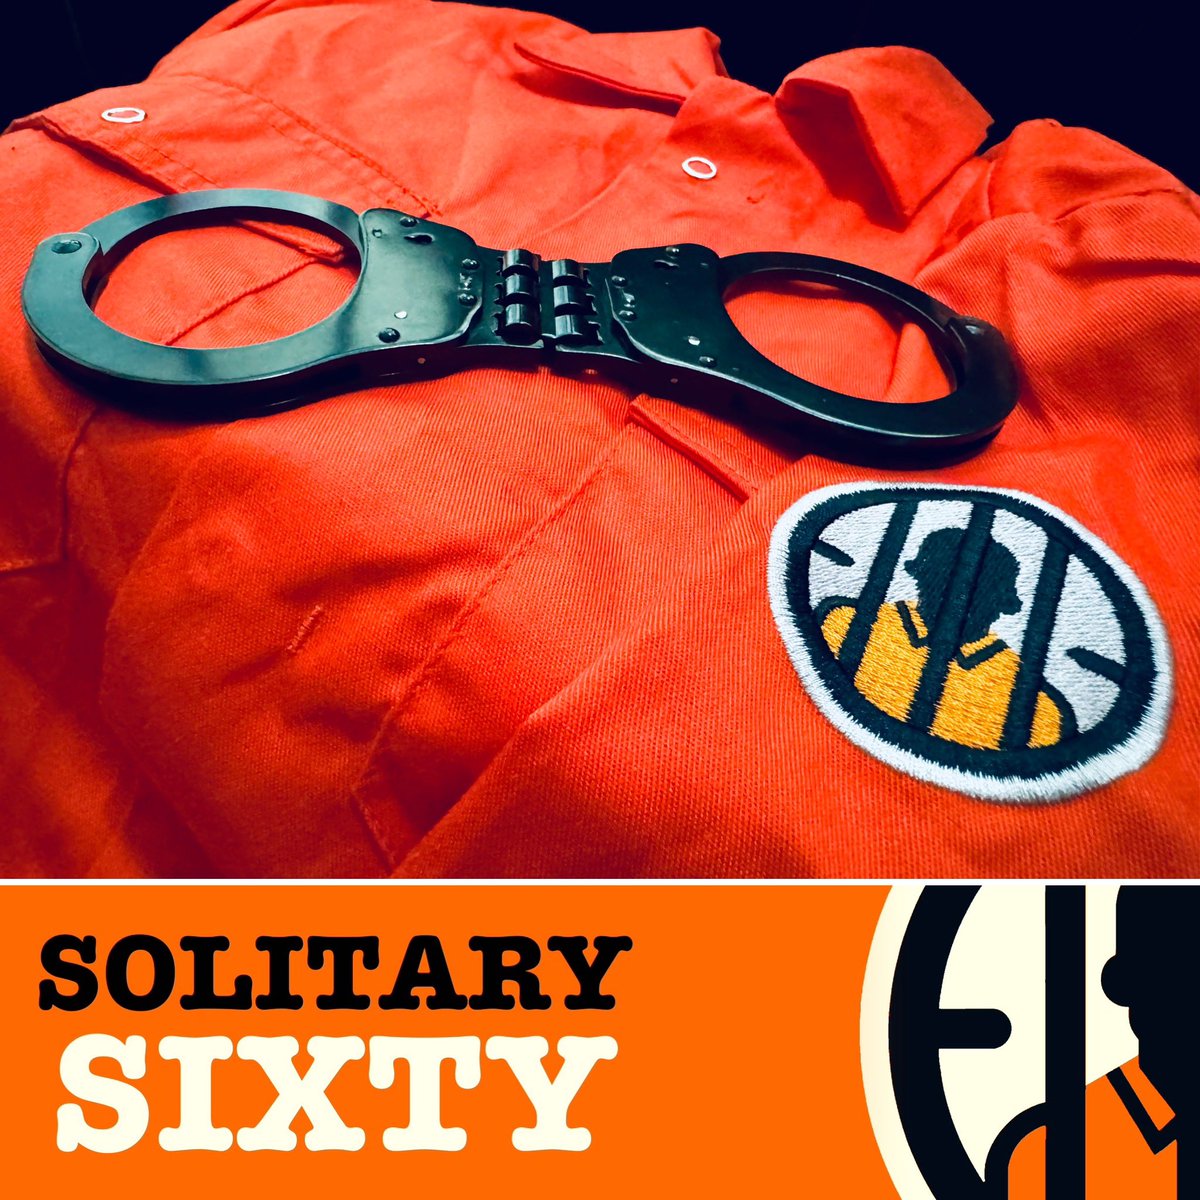 The cuffs and jumpsuit are ready…
⛓️
#escaperoom #jail #jailcell #prison #prisoner #imprisonment #solitaryconfinement #lockedup #behindbars #SolitarySixty #Solitary60